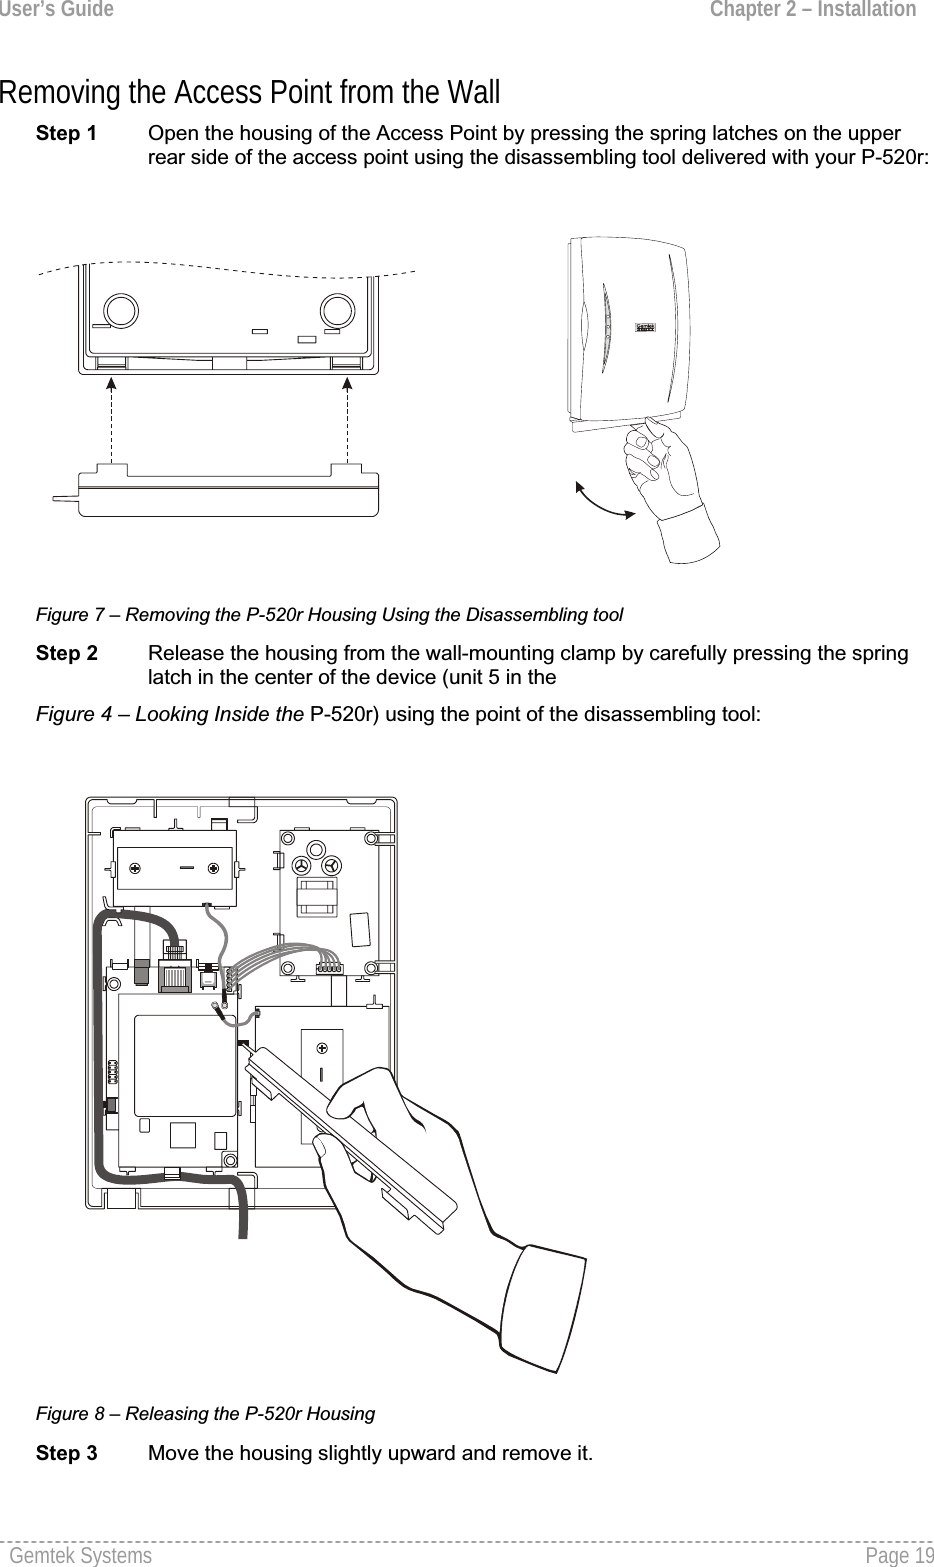 User’s Guide  Chapter 2 – InstallationRemoving the Access Point from the Wall Step 1  Open the housing of the Access Point by pressing the spring latches on the upperrear side of the access point using the disassembling tool delivered with your P-520r:Figure 7 – Removing the P-520r Housing Using the Disassembling tool Step 2 Release the housing from the wall-mounting clamp by carefully pressing the springlatch in the center of the device (unit 5 in the Figure 4 – Looking Inside the P-520r) using the point of the disassembling tool: Figure 8 – Releasing the P-520r Housing Step 3  Move the housing slightly upward and remove it. Gemtek Systems  Page 19